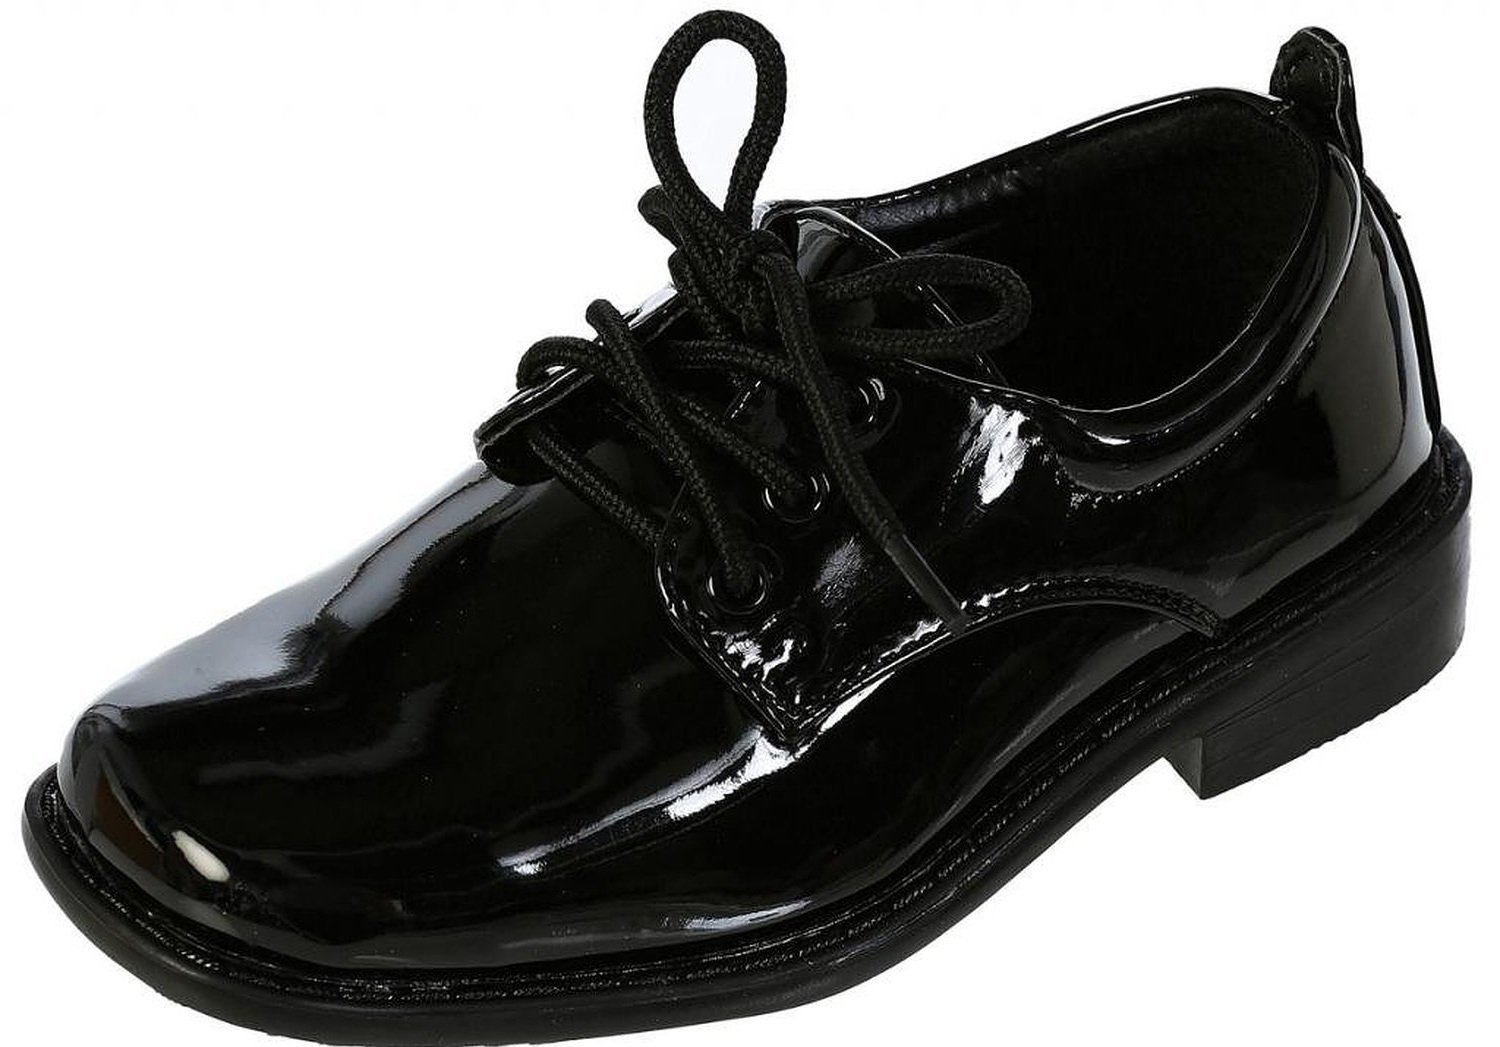 Boys Square Toe Lace Up Oxford Patent Dress Shoes - Available in Black 8 Toddler